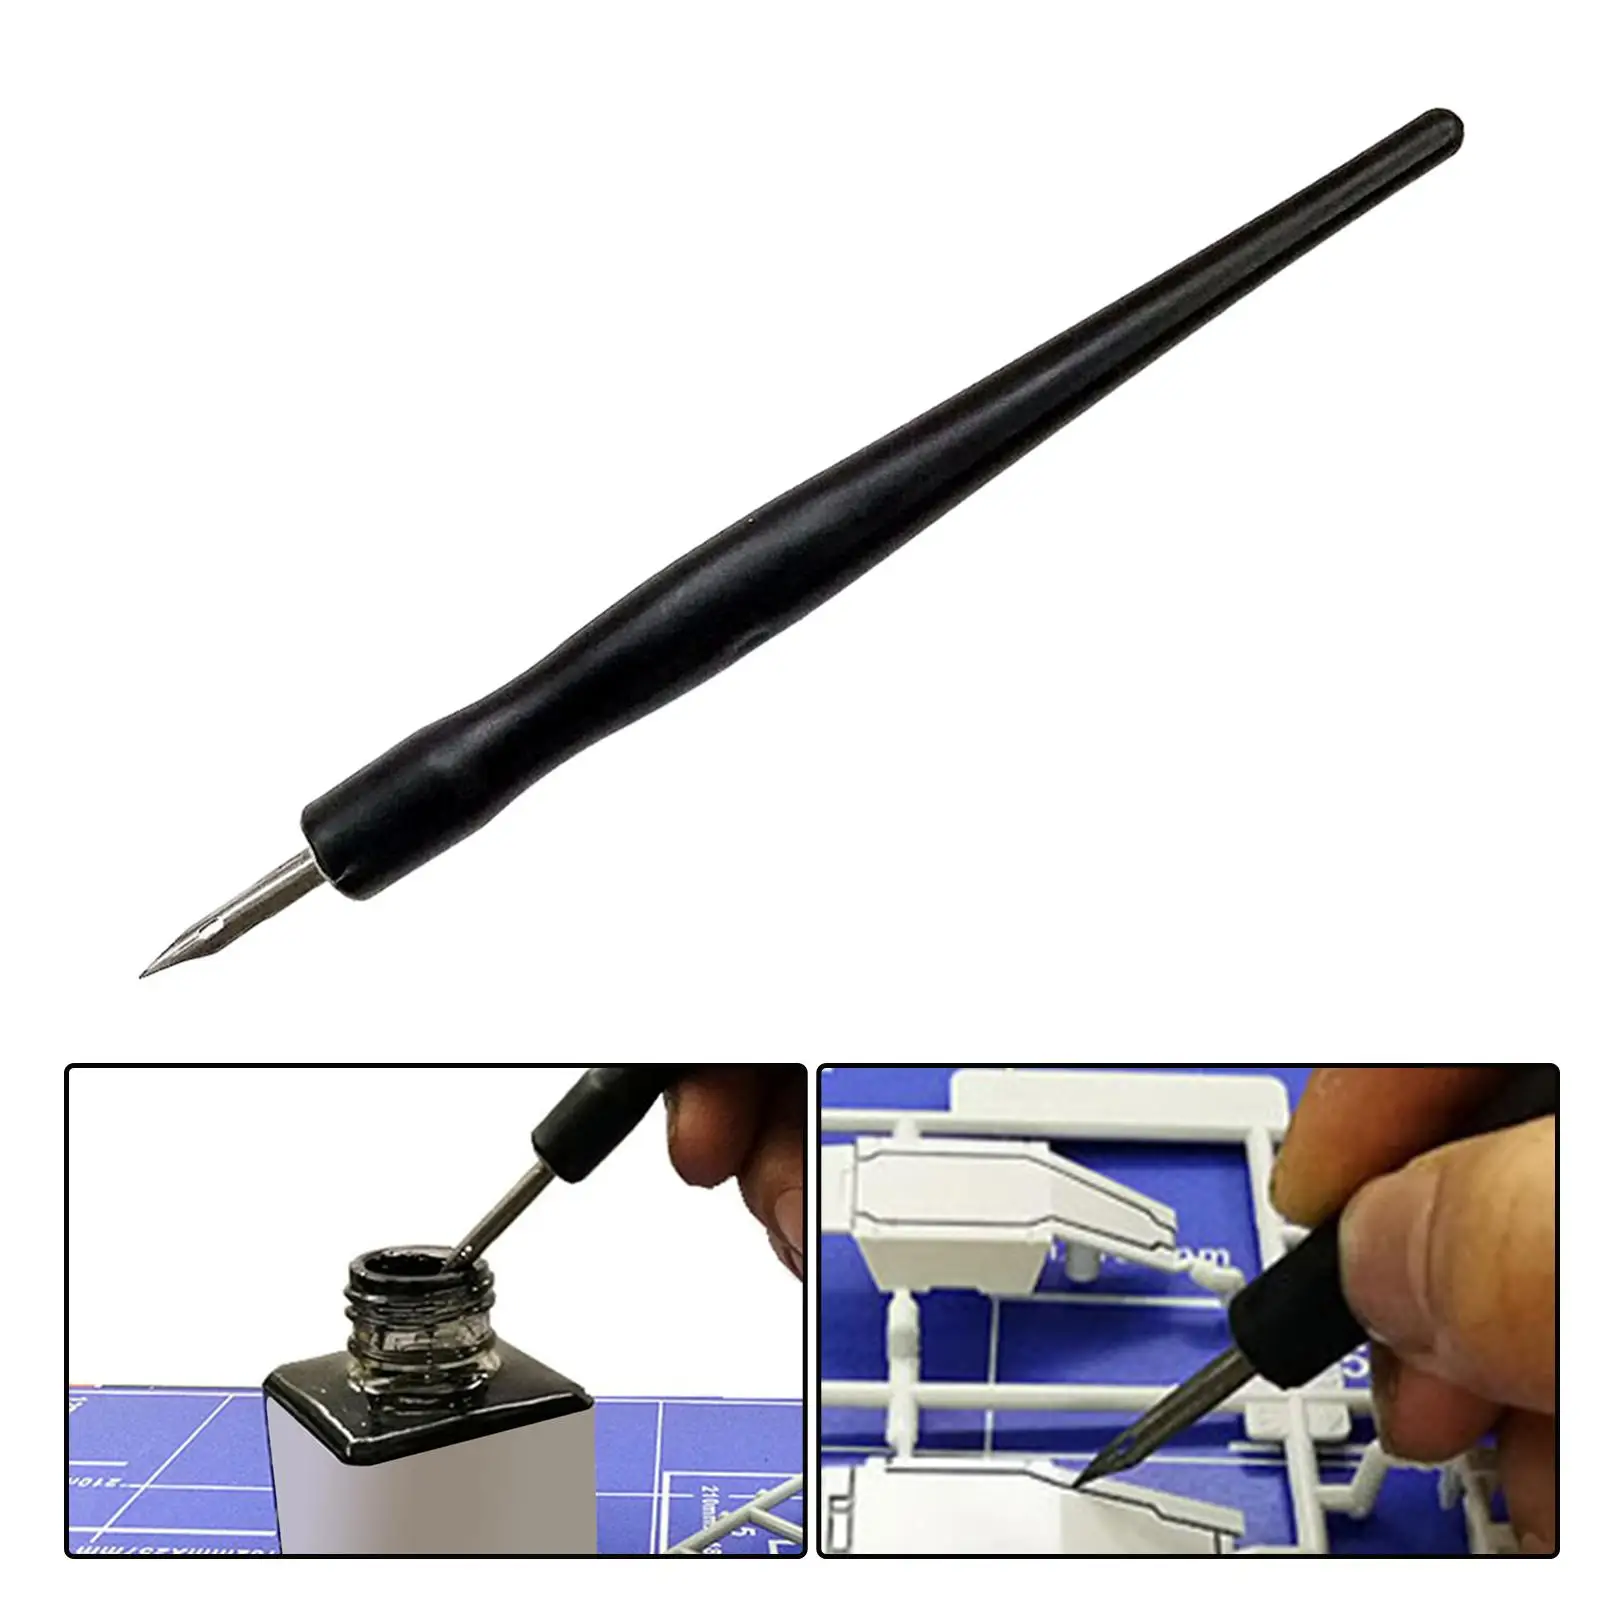 Panel Line Accent Pen Assembly Model Tool Model Painting Tool Permeation Pen Leaking Pen Infiltration Line Pen Accessory Crafts